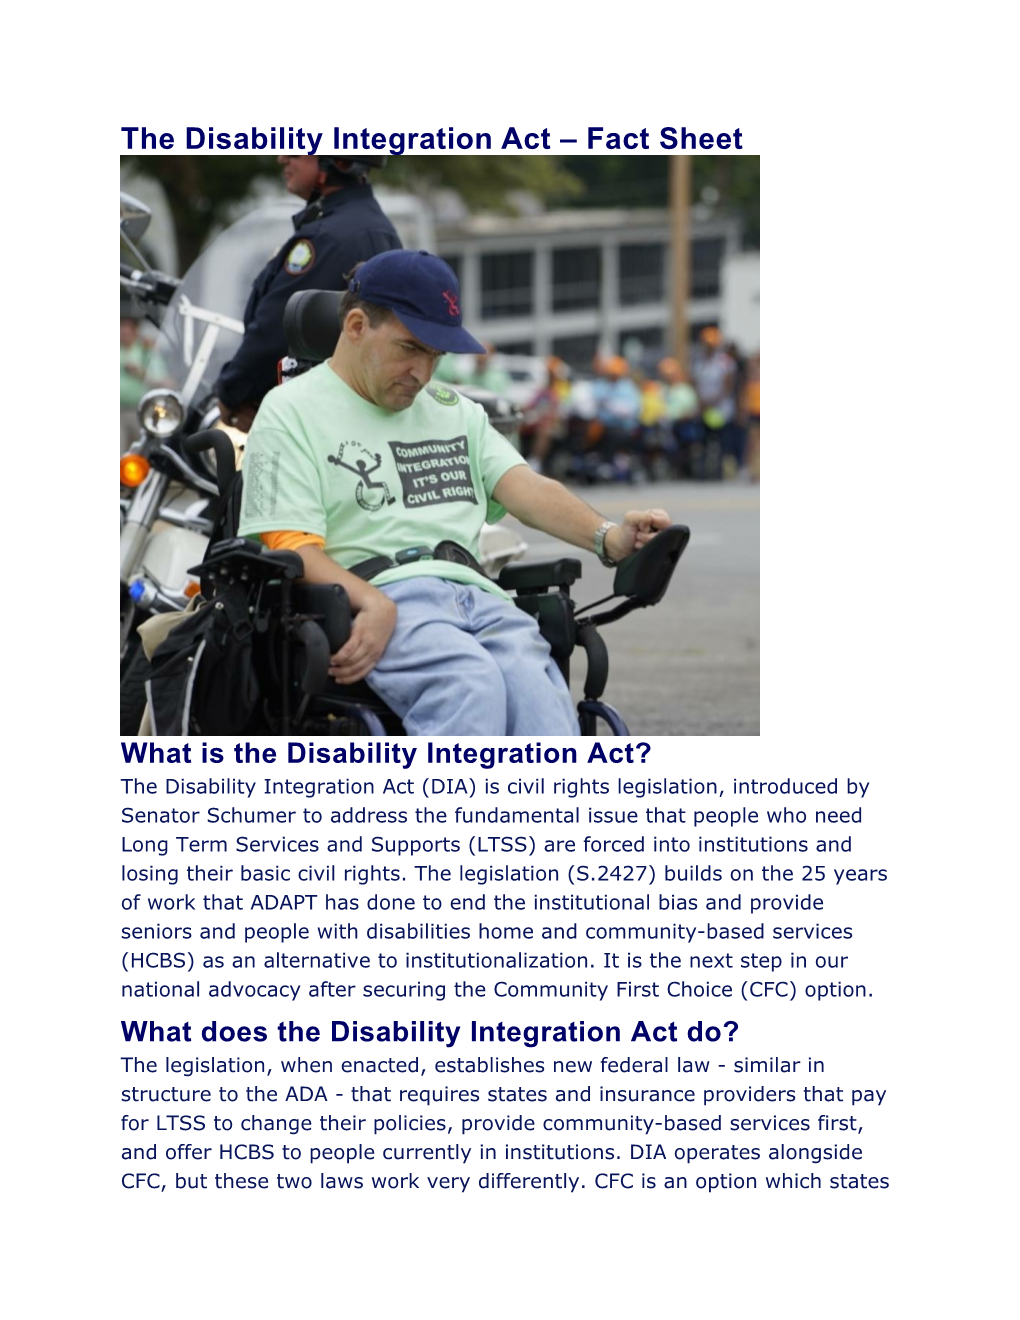 The Disability Integration Act Fact Sheet